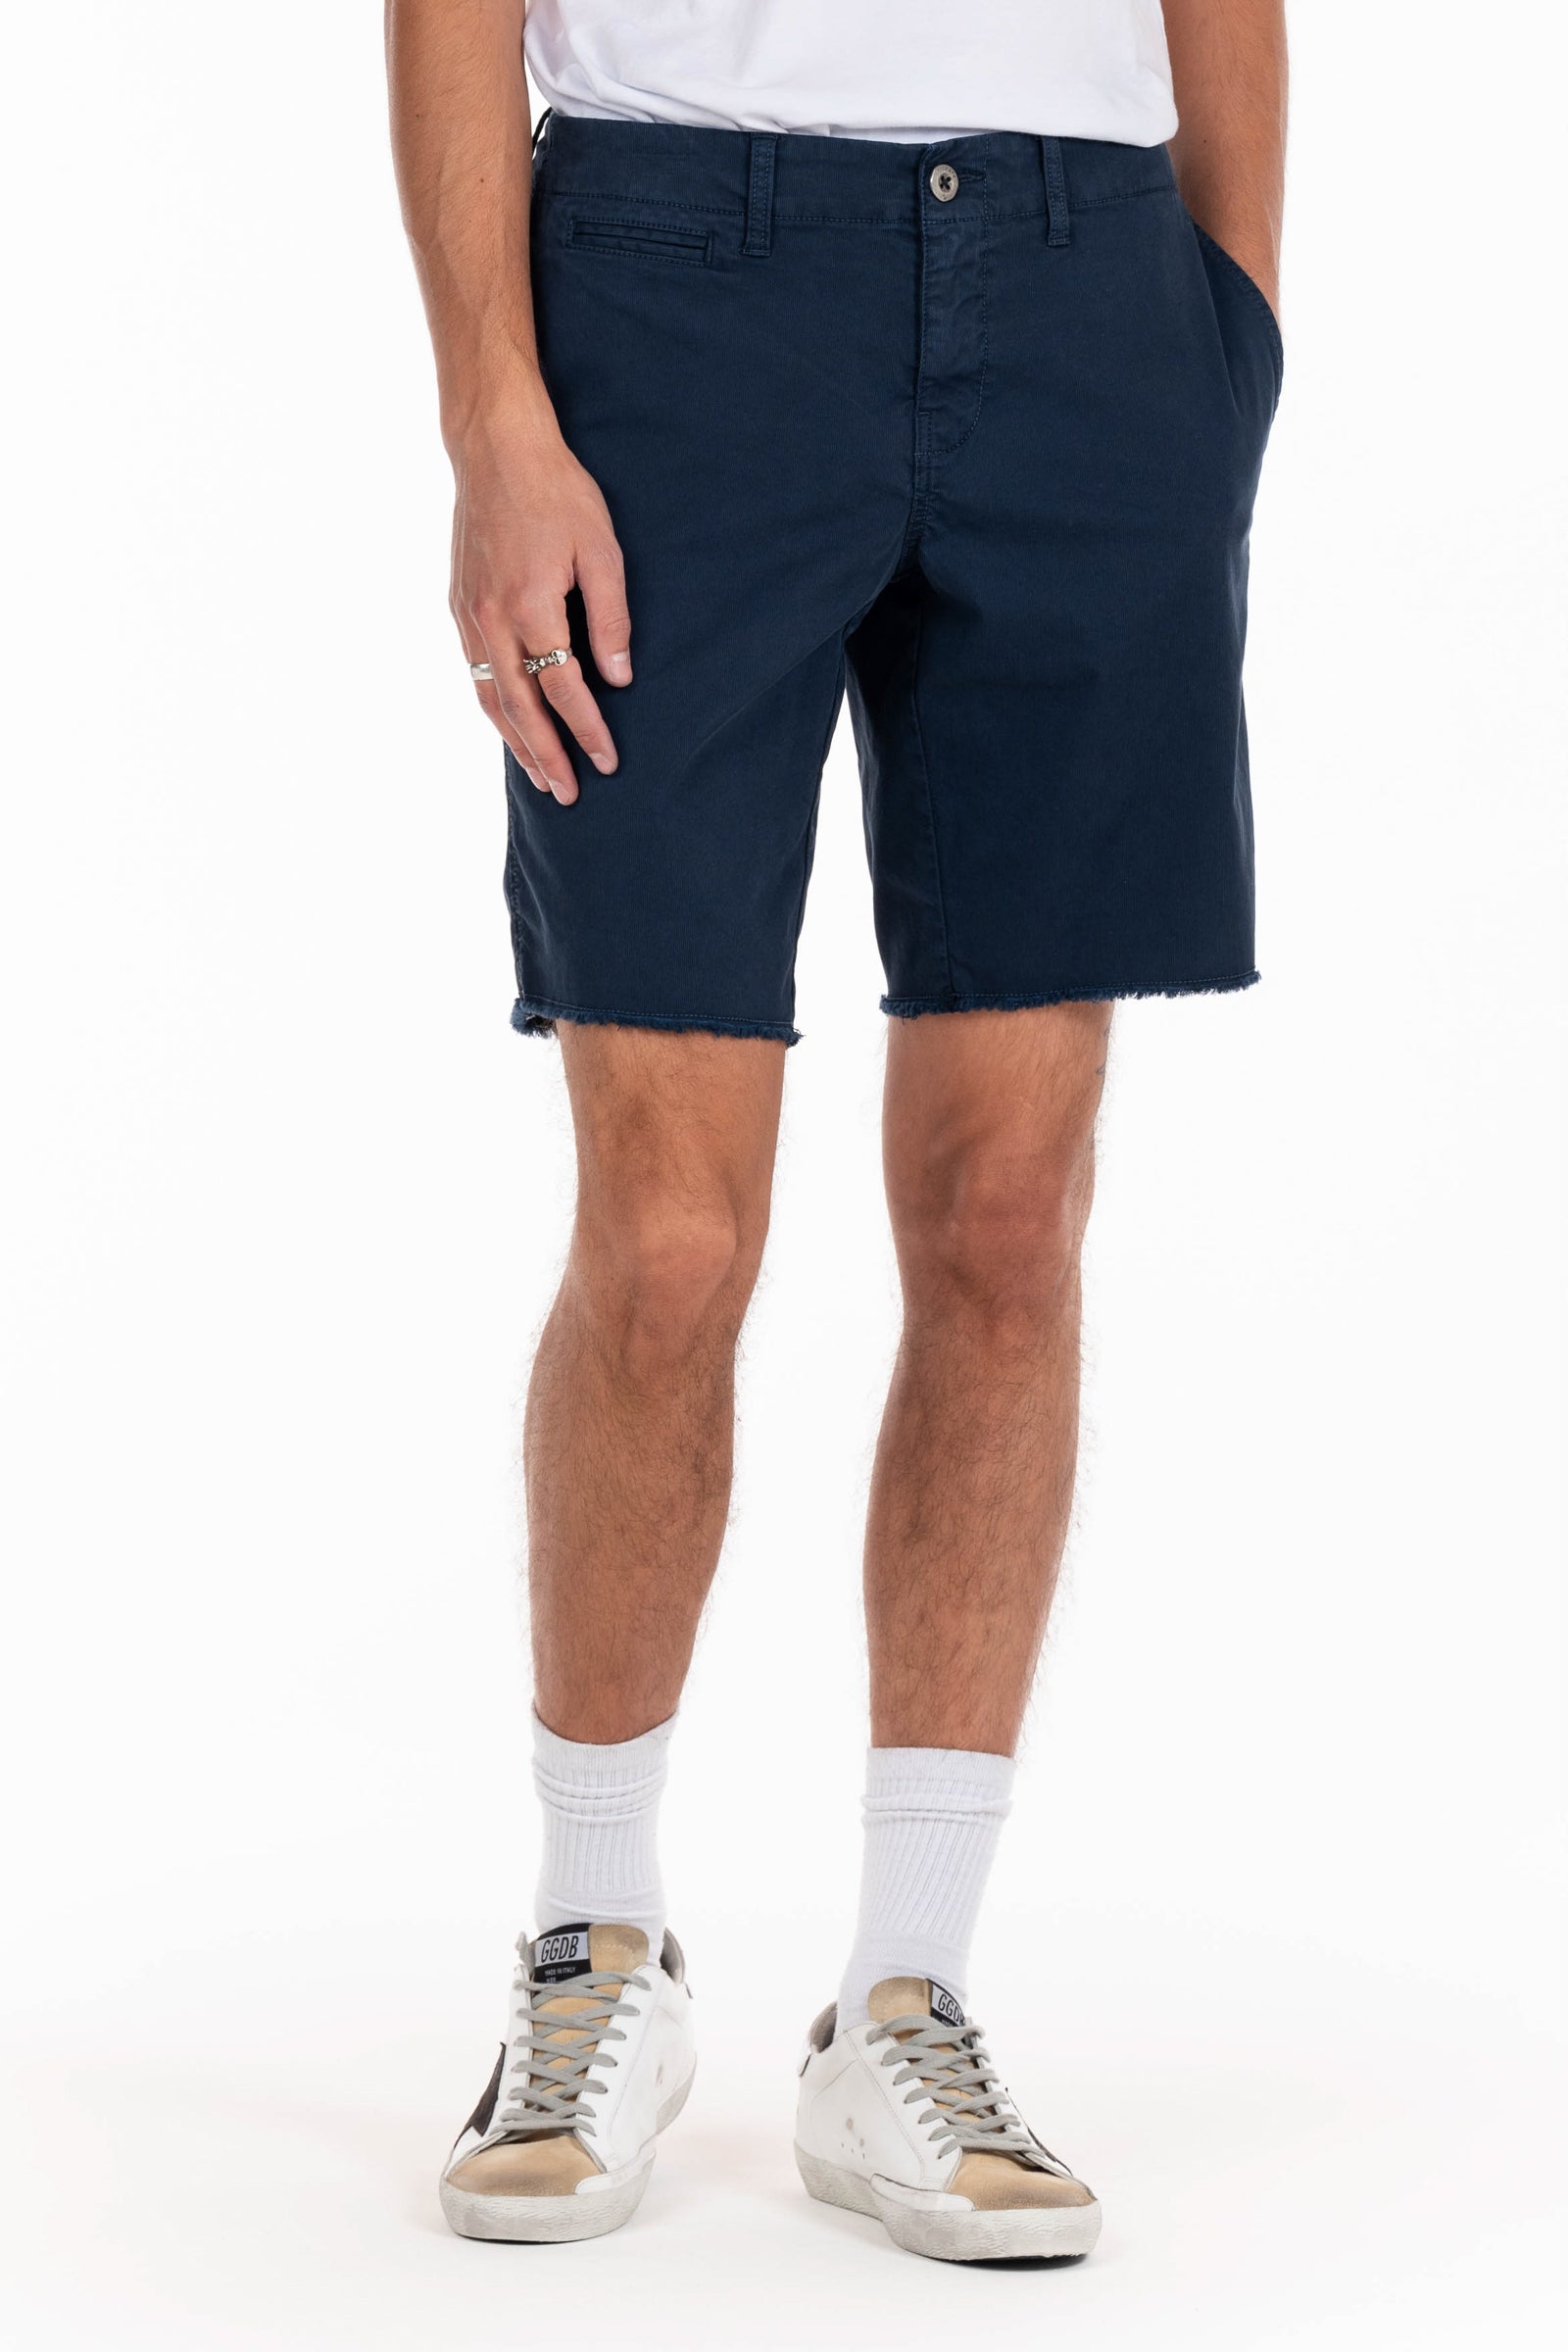 Original Paperbacks Rockland Chino Short in Navy on Model Cropped Styled View